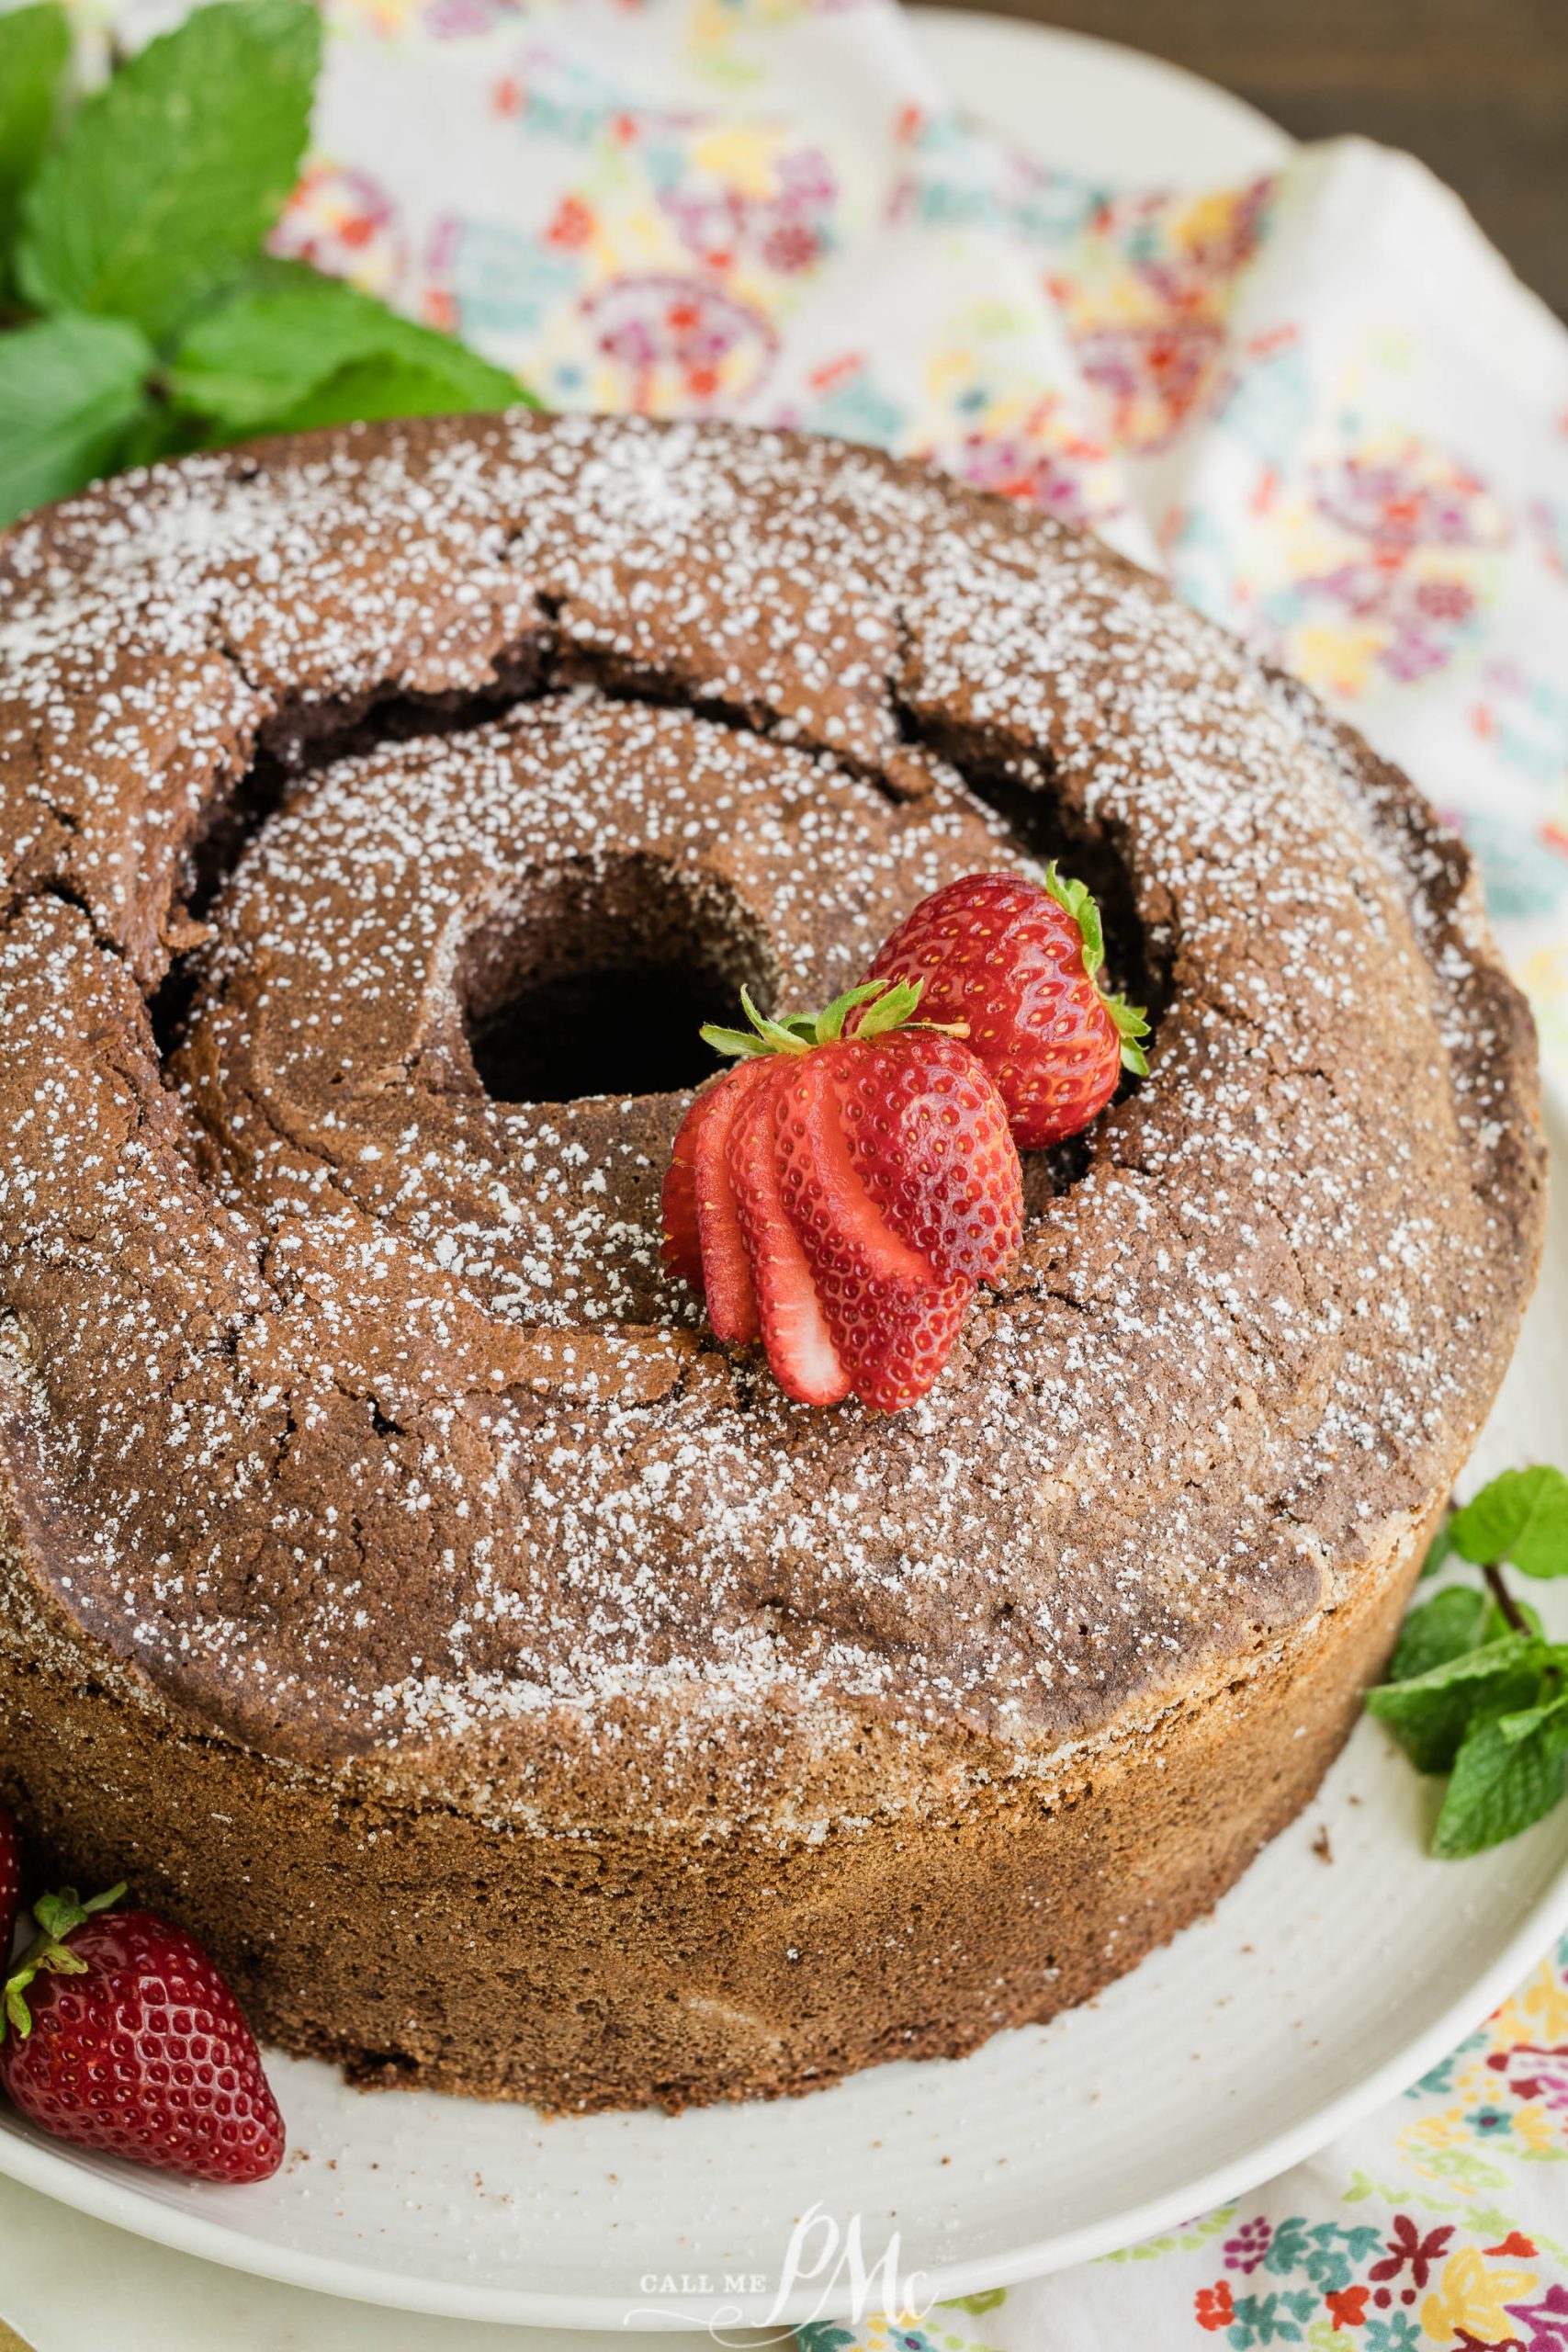 A chocolate bundt cake sprinkled with powdered sugar and garnished with fresh strawberries on a floral plate.